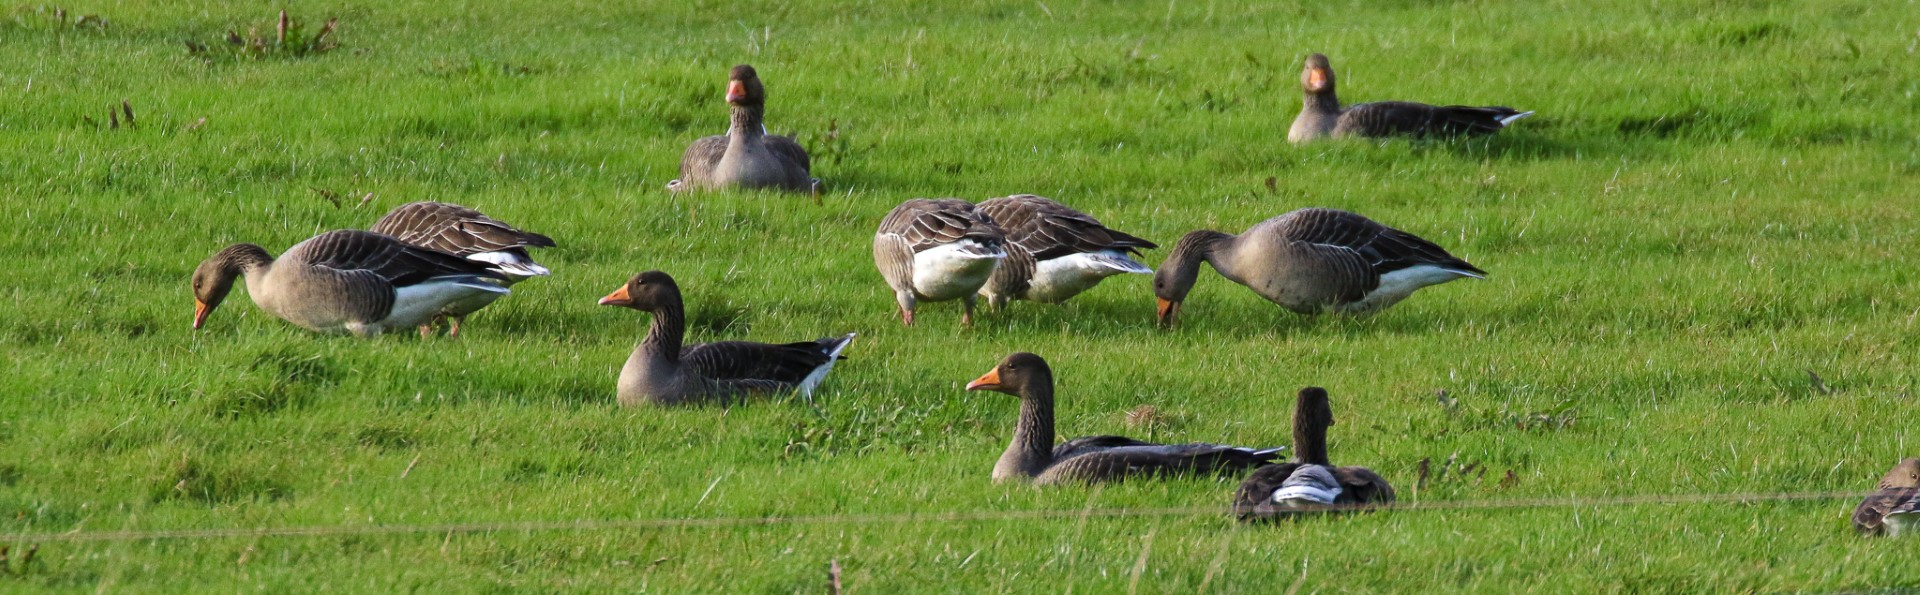 Greylag Geese feed on grass at Kilcoole, Wicklow